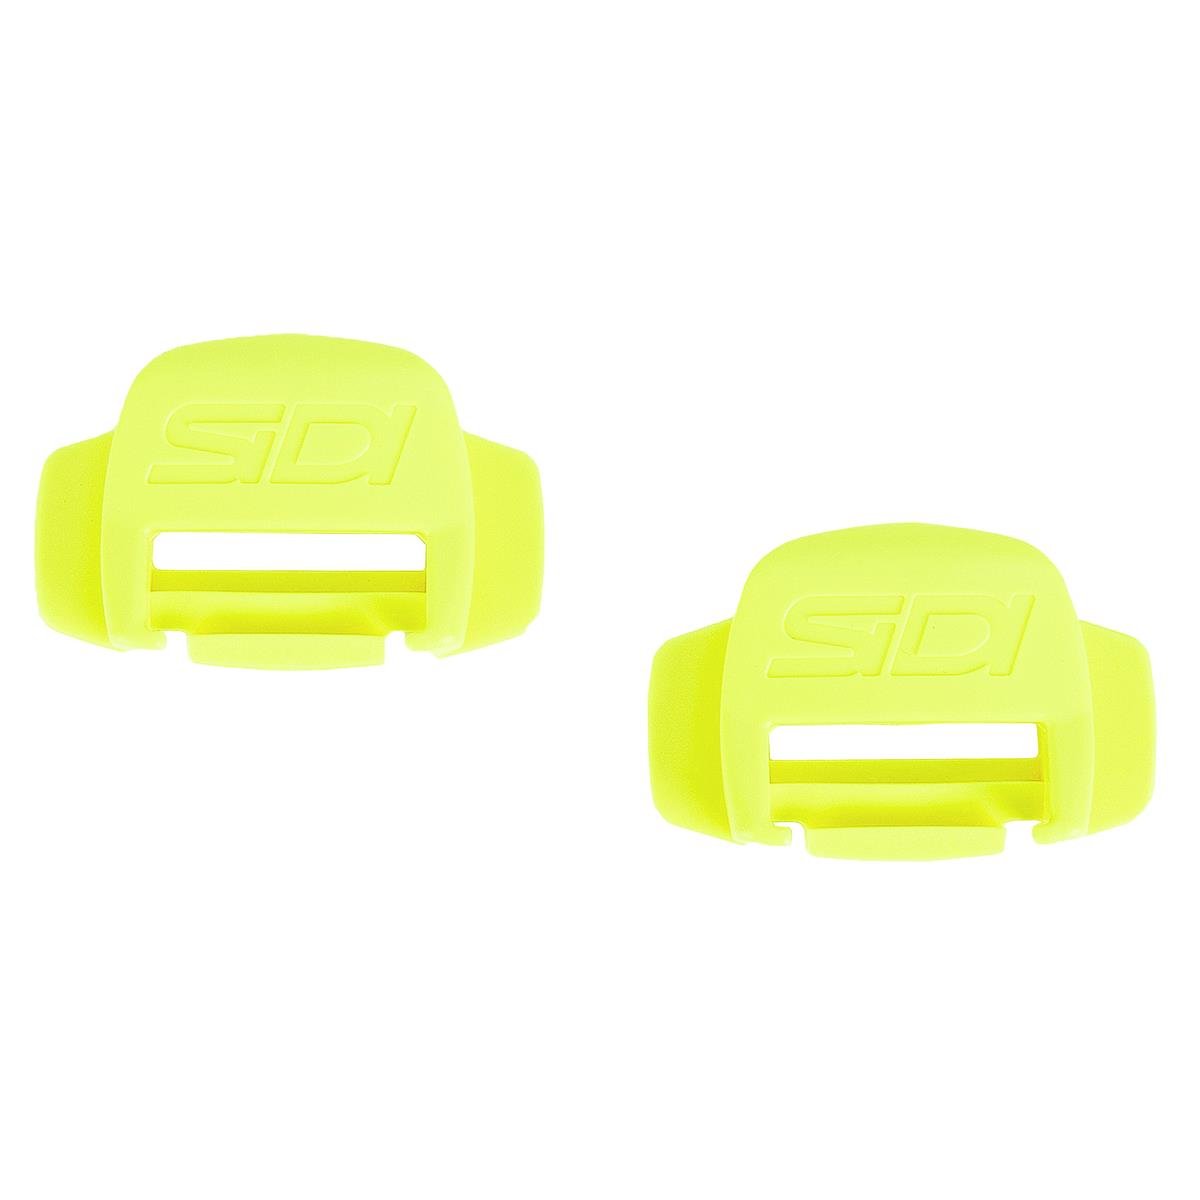 Sidi Replacement Strap Holder Crossfire / Agueda / Stinger / X-3 / Trial Yellow